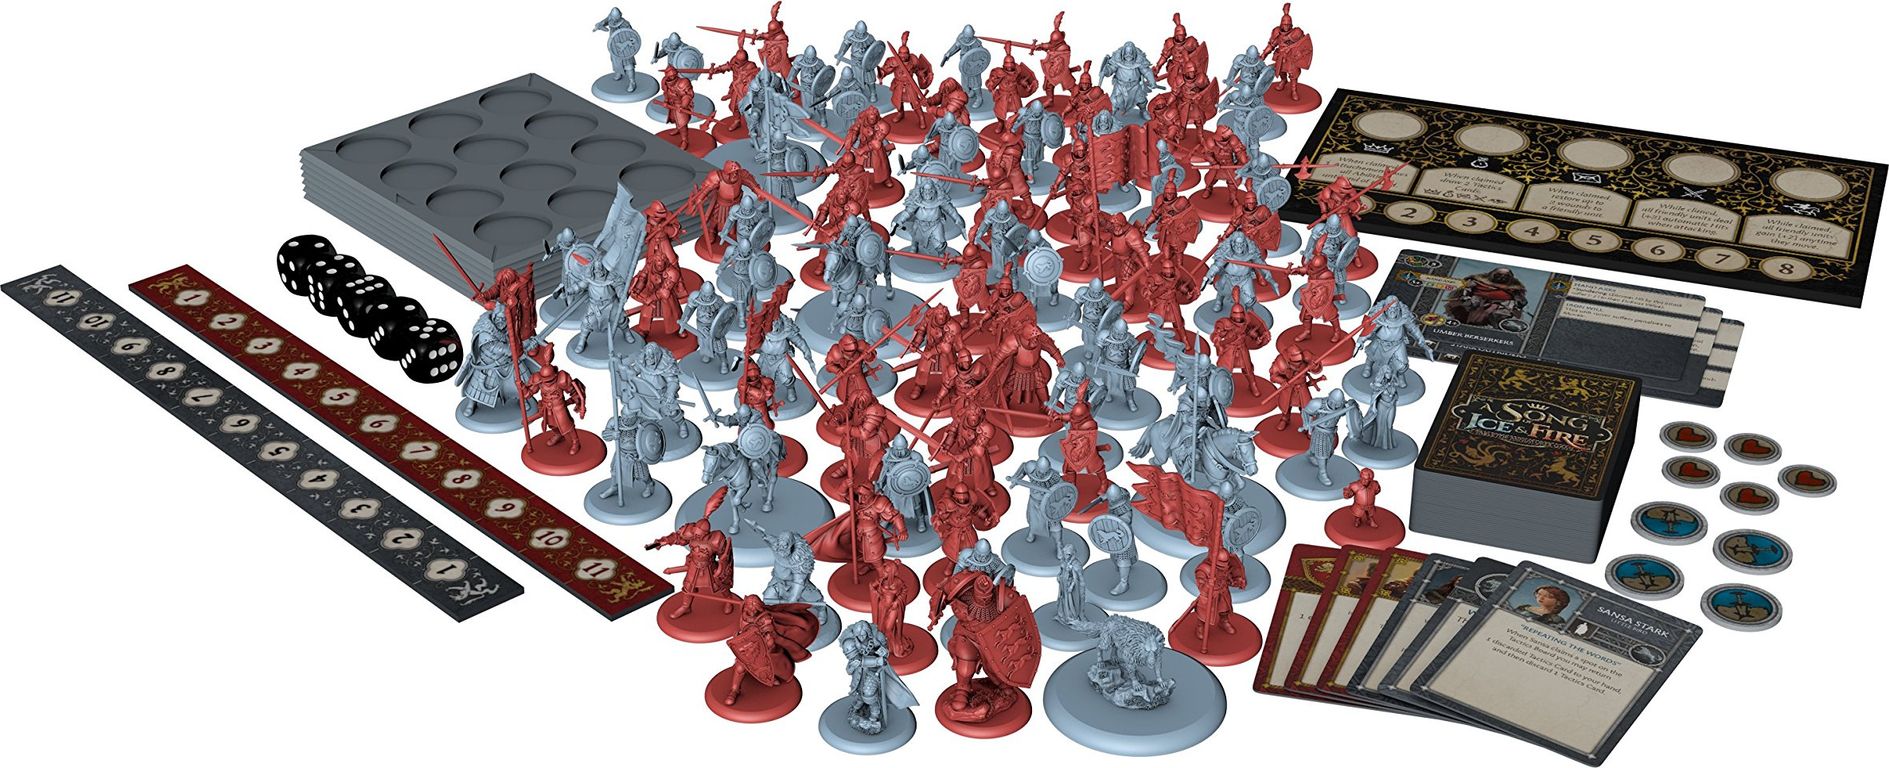 A Song of Ice & Fire: Tabletop Miniatures Game - Stark vs Lannister Starter Set components